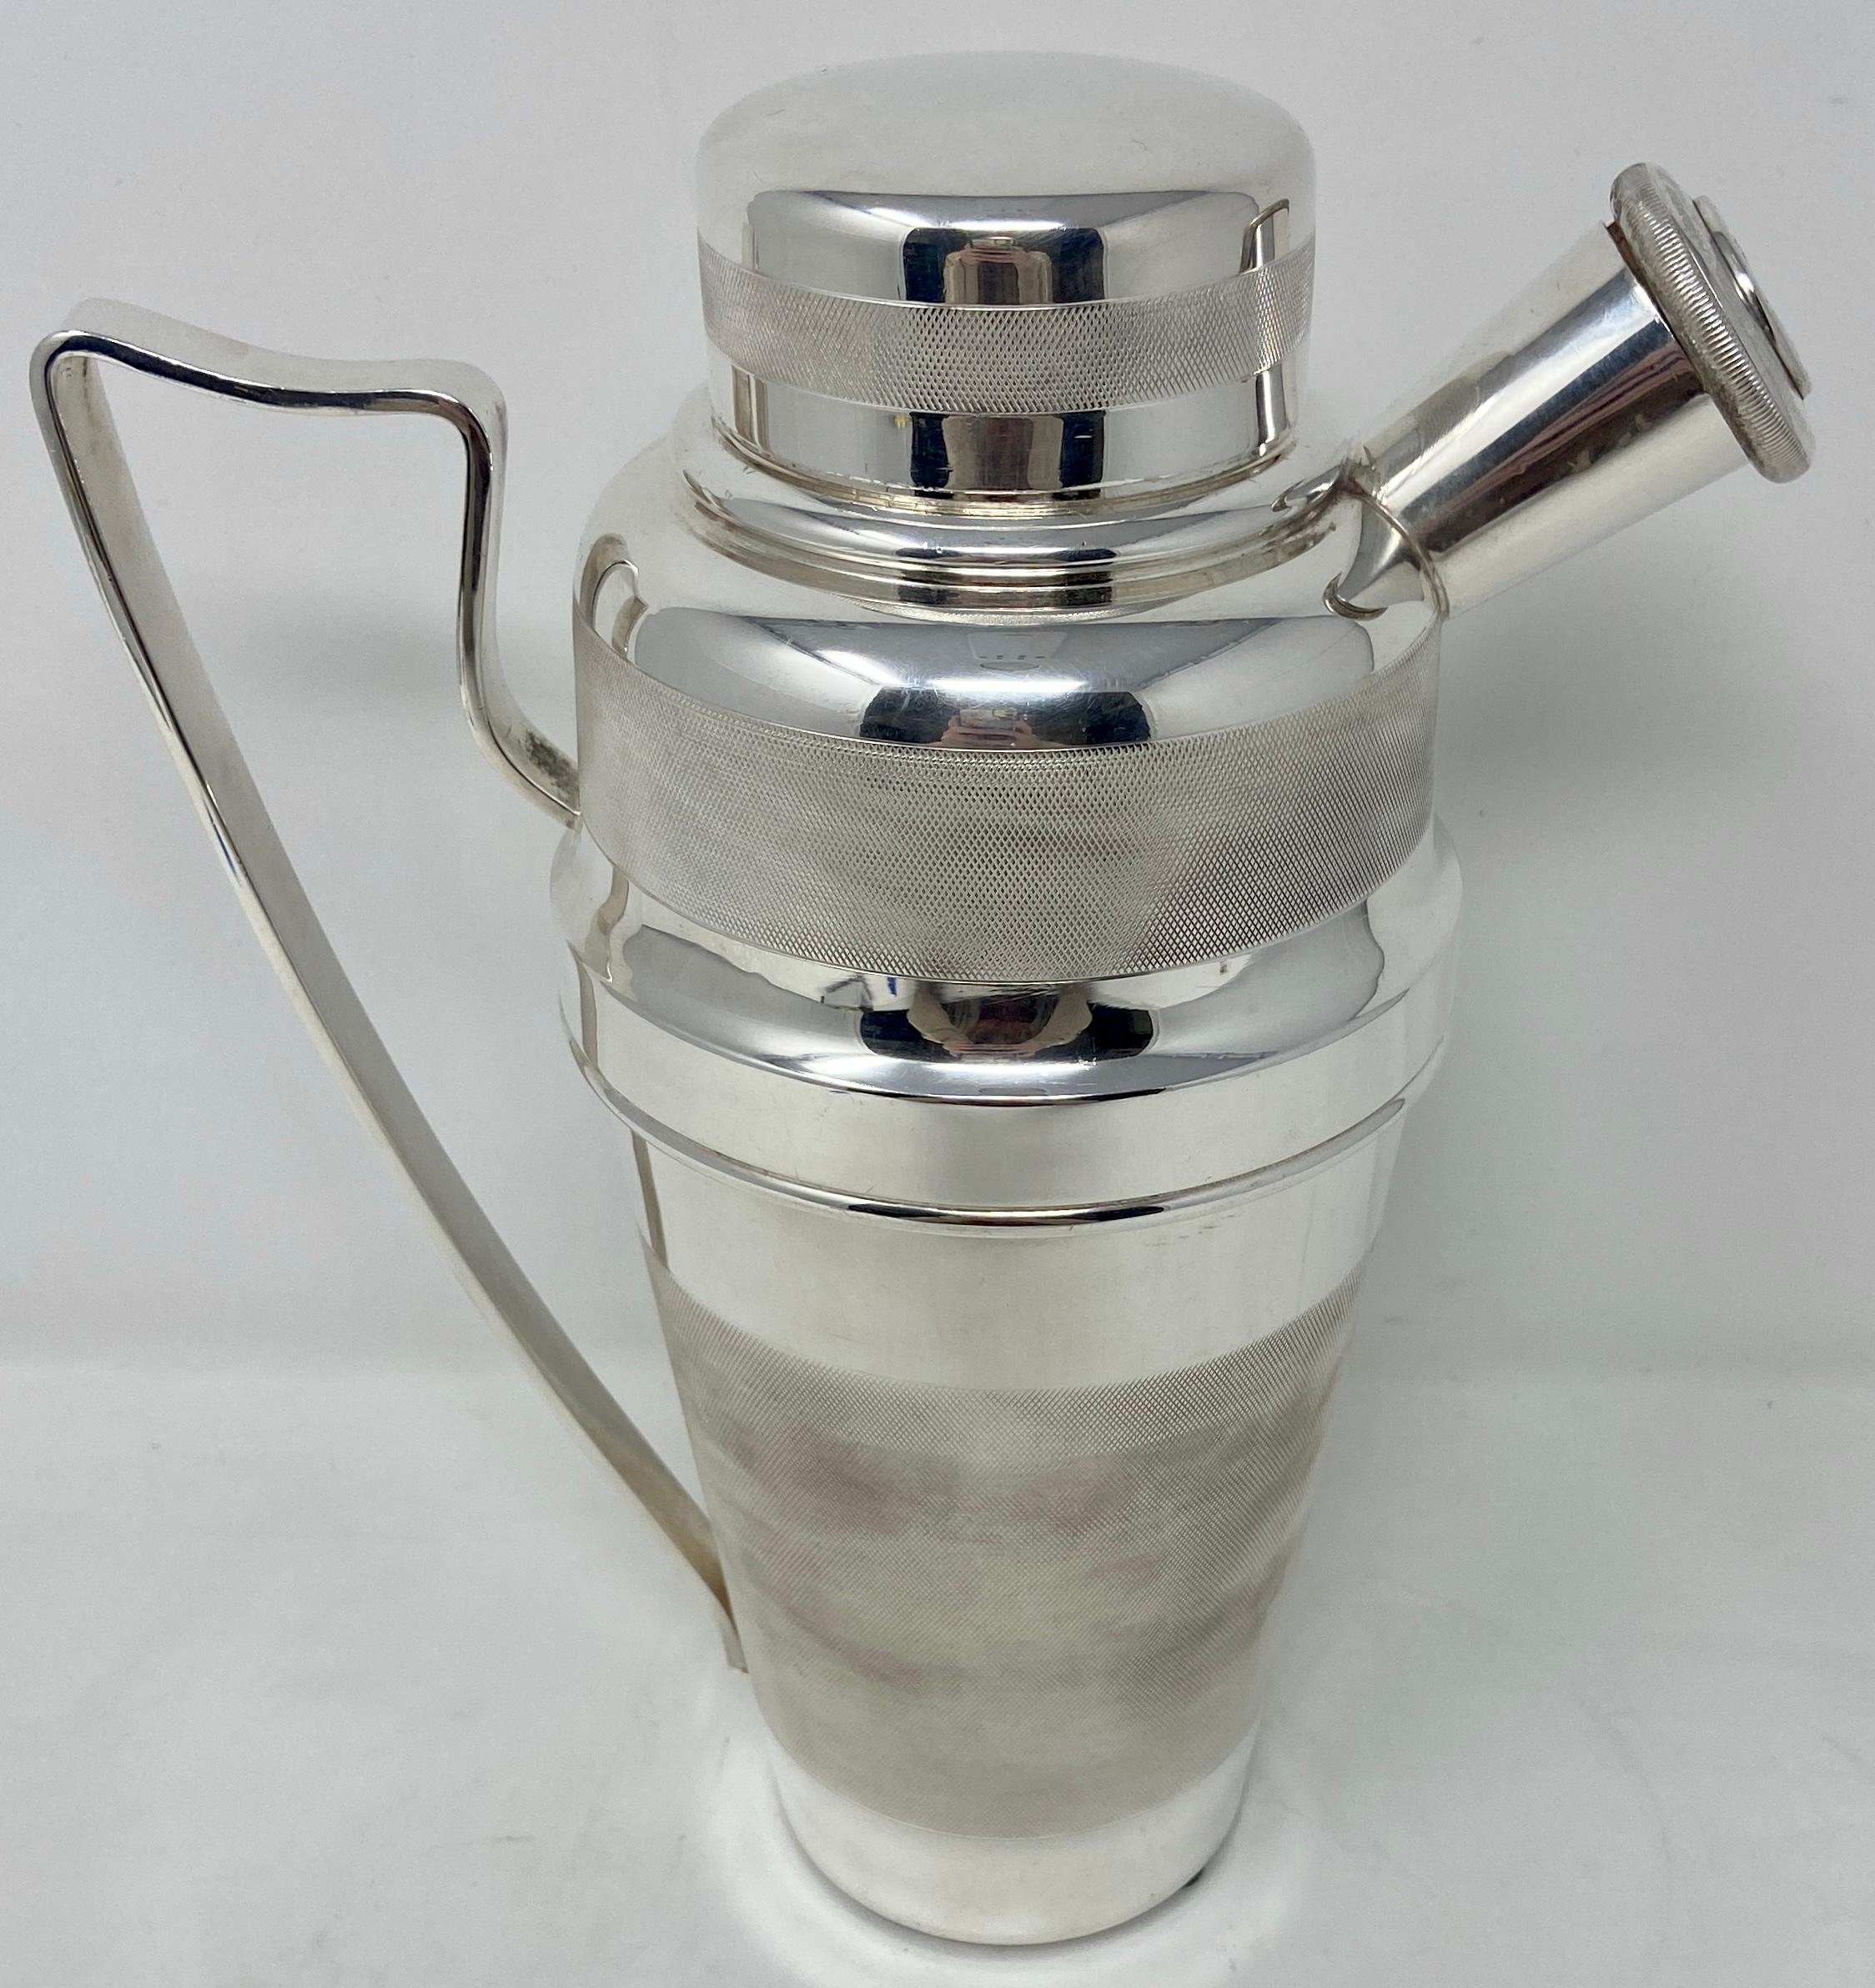 Fabulous large-size antique English Art Deco silver-plated cocktail shaker / pitcher, circa 1920s.
Hallmarked 